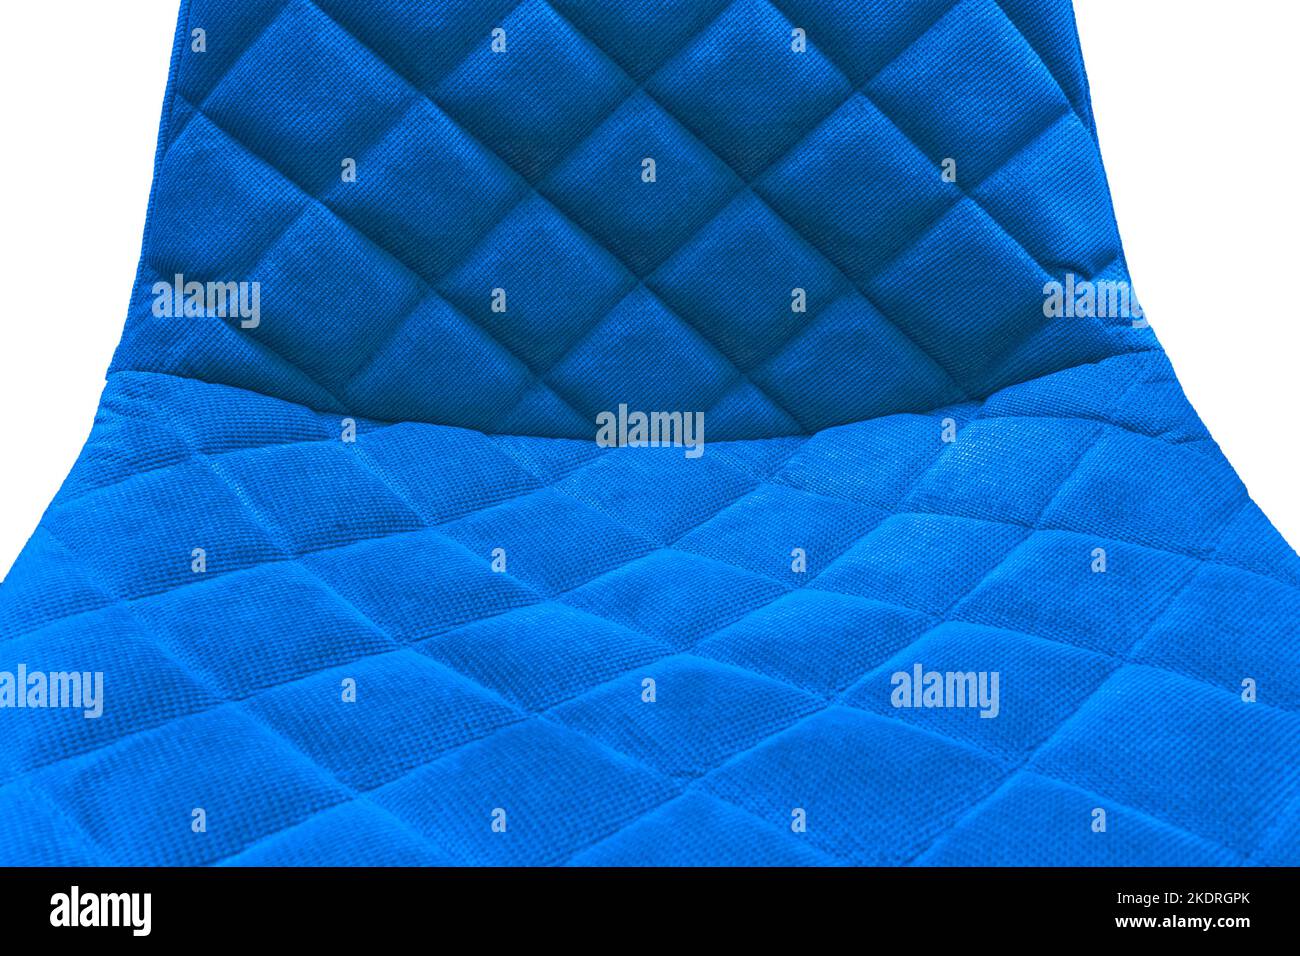 Fabric blue upholstery of interior chair design object decoration vintage on white background isolated. Stock Photo